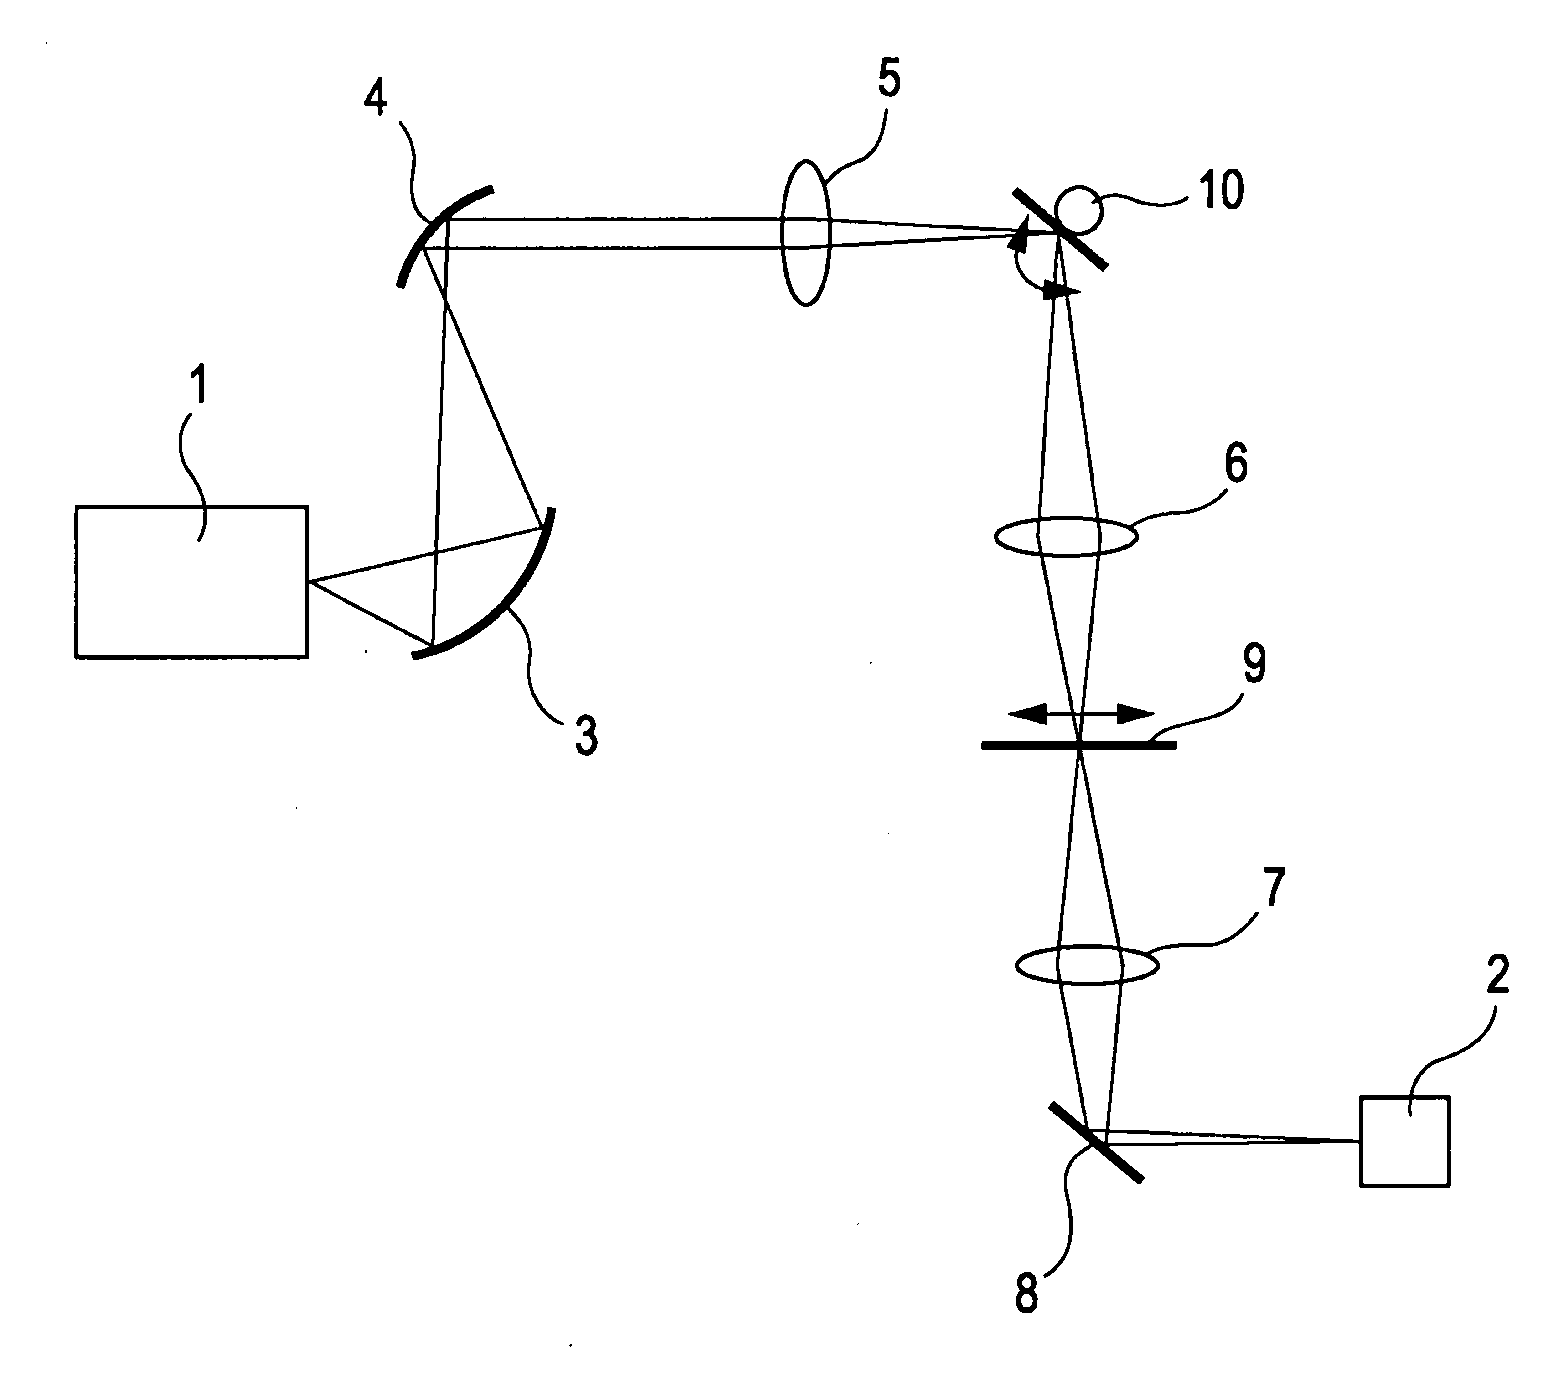 Apparatus for detecting information on object